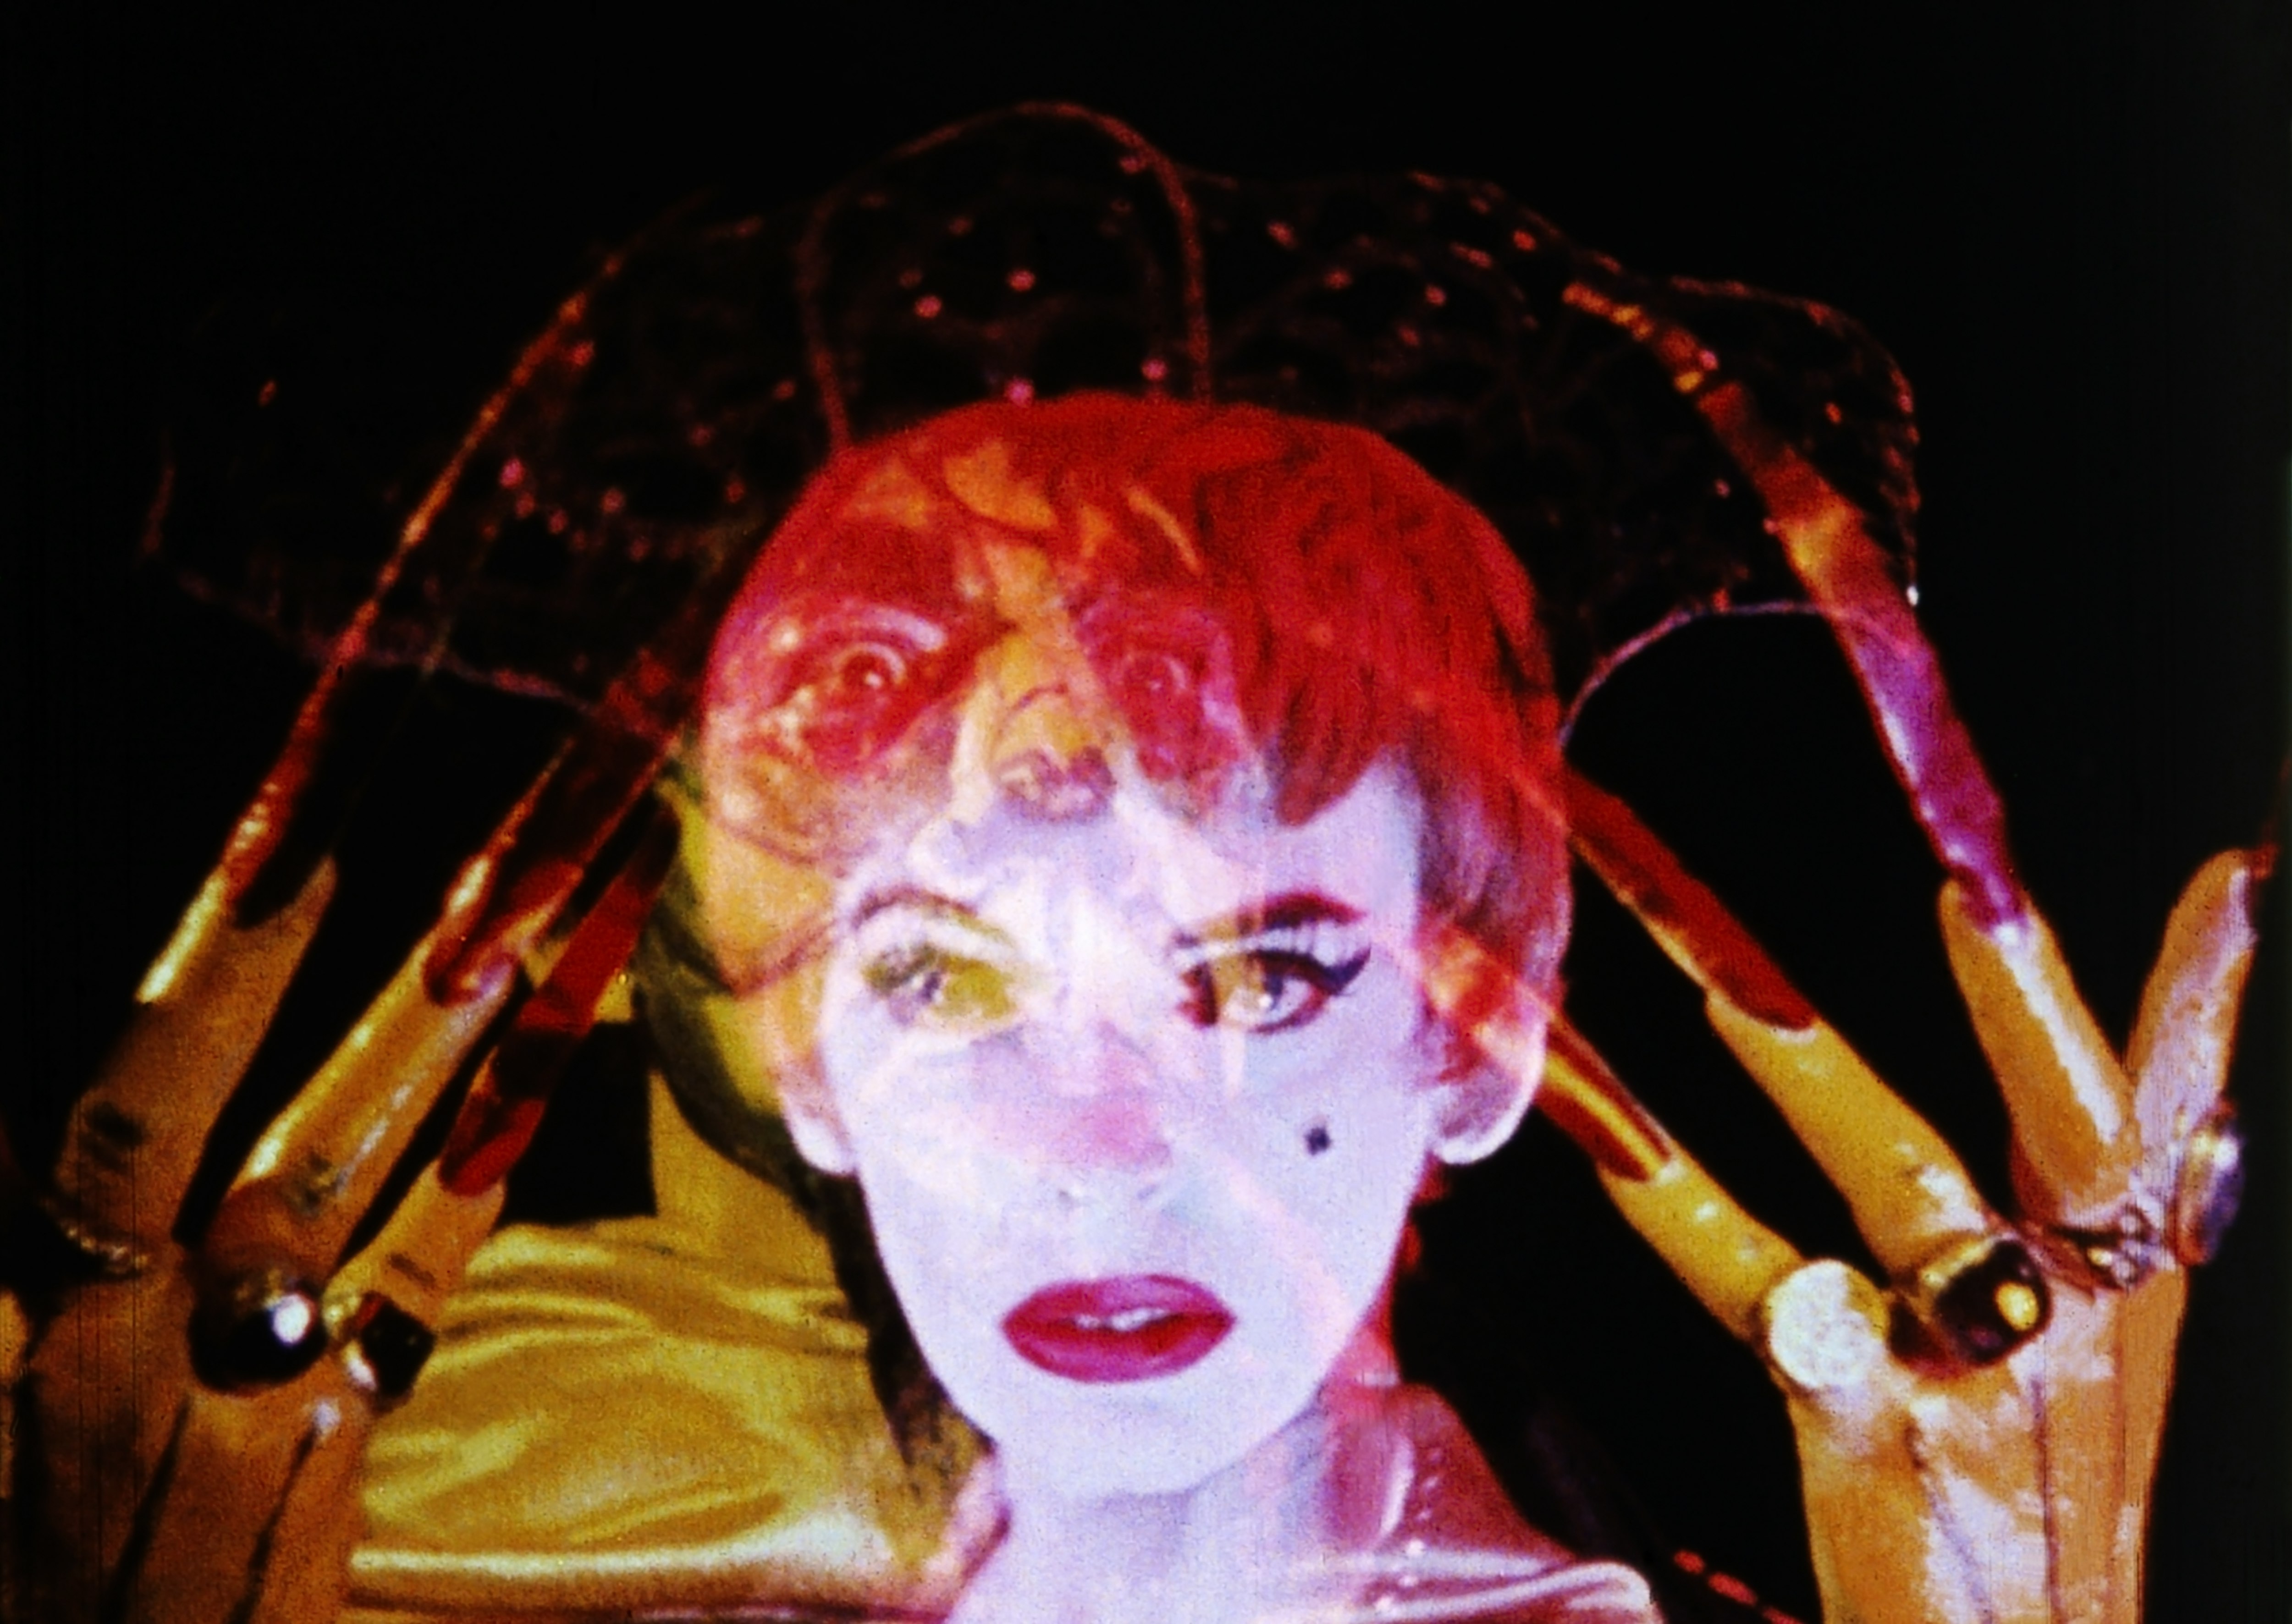 "Scarlet Woman (Marjorie Cameron)," Kenneth Anger. Still from Inauguration of the Pleasure Dome, 1954–66. Courtesy of The Estate of Kenneth Anger and Sprüth Magers. © The Estate of Kenneth Anger, 1966. Courtesy The Estate of Kenneth Anger and Sprüth Magers.